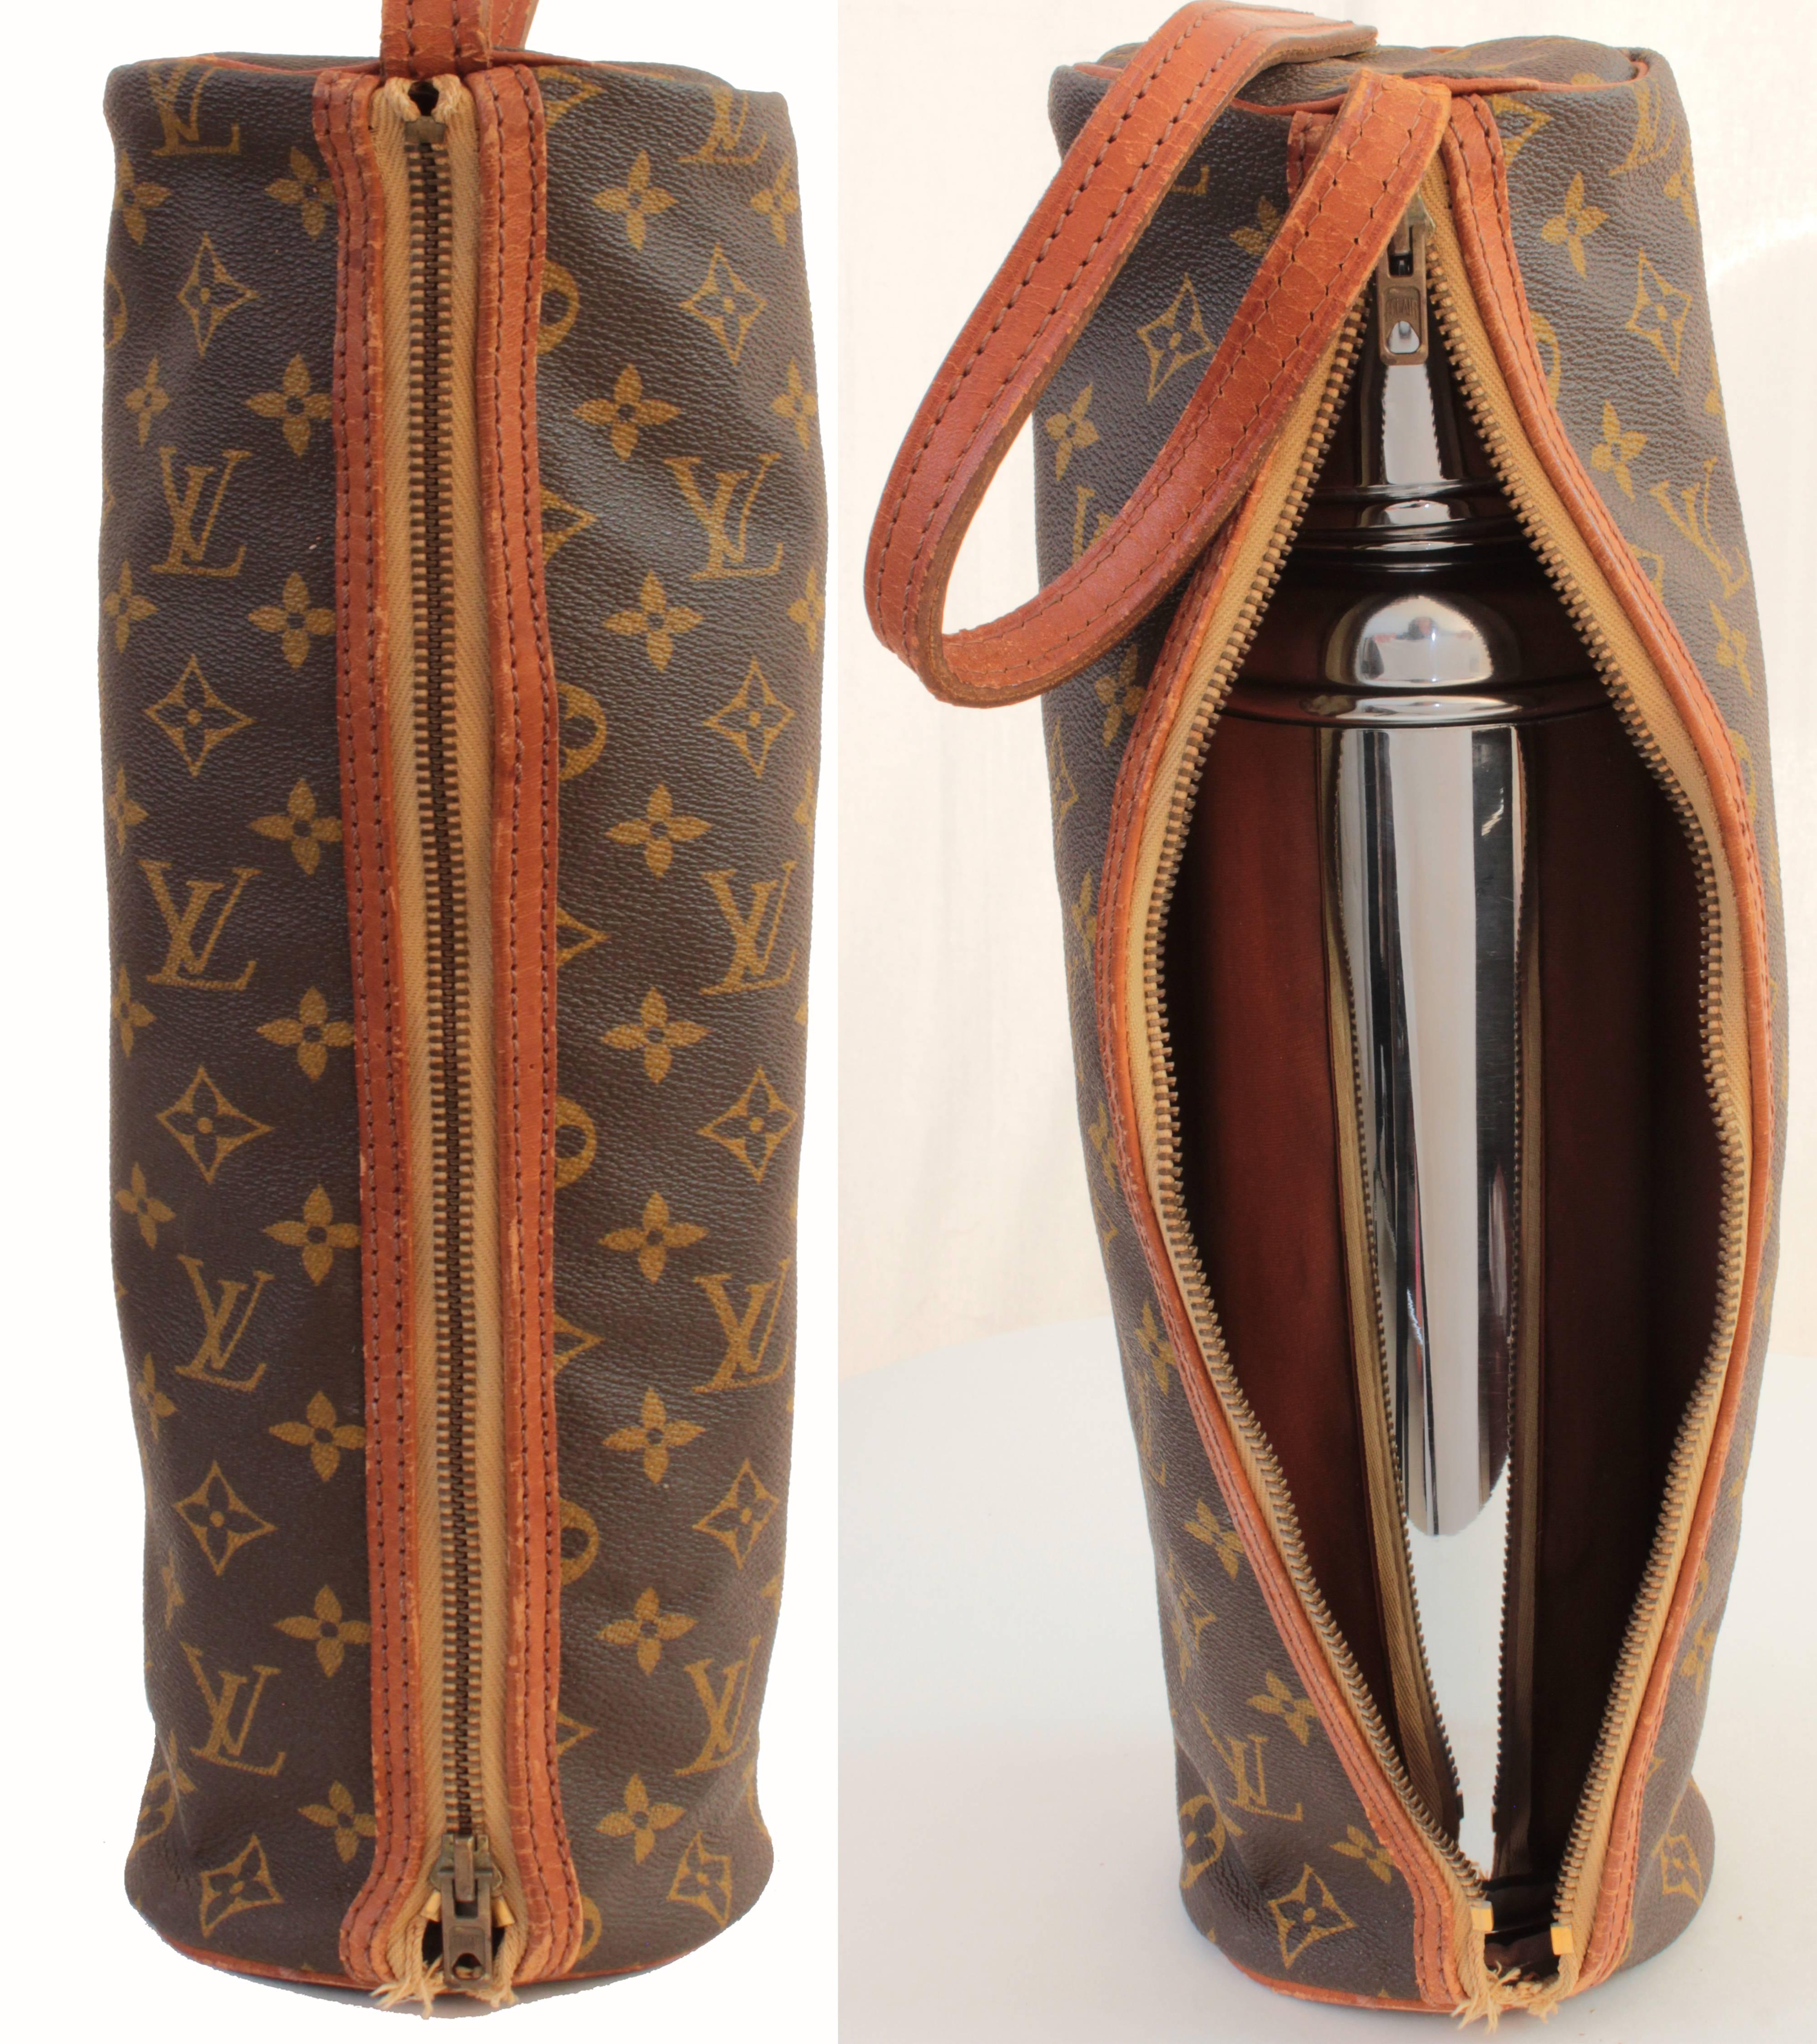 This incredibly rare set was made by Louis Vuitton and Thermid France, most likely in the early 1970s.  The case features Vuitton's signature monogram canvas and vachetta leather trim.  The Thermid flask includes the original (and working) vacuum